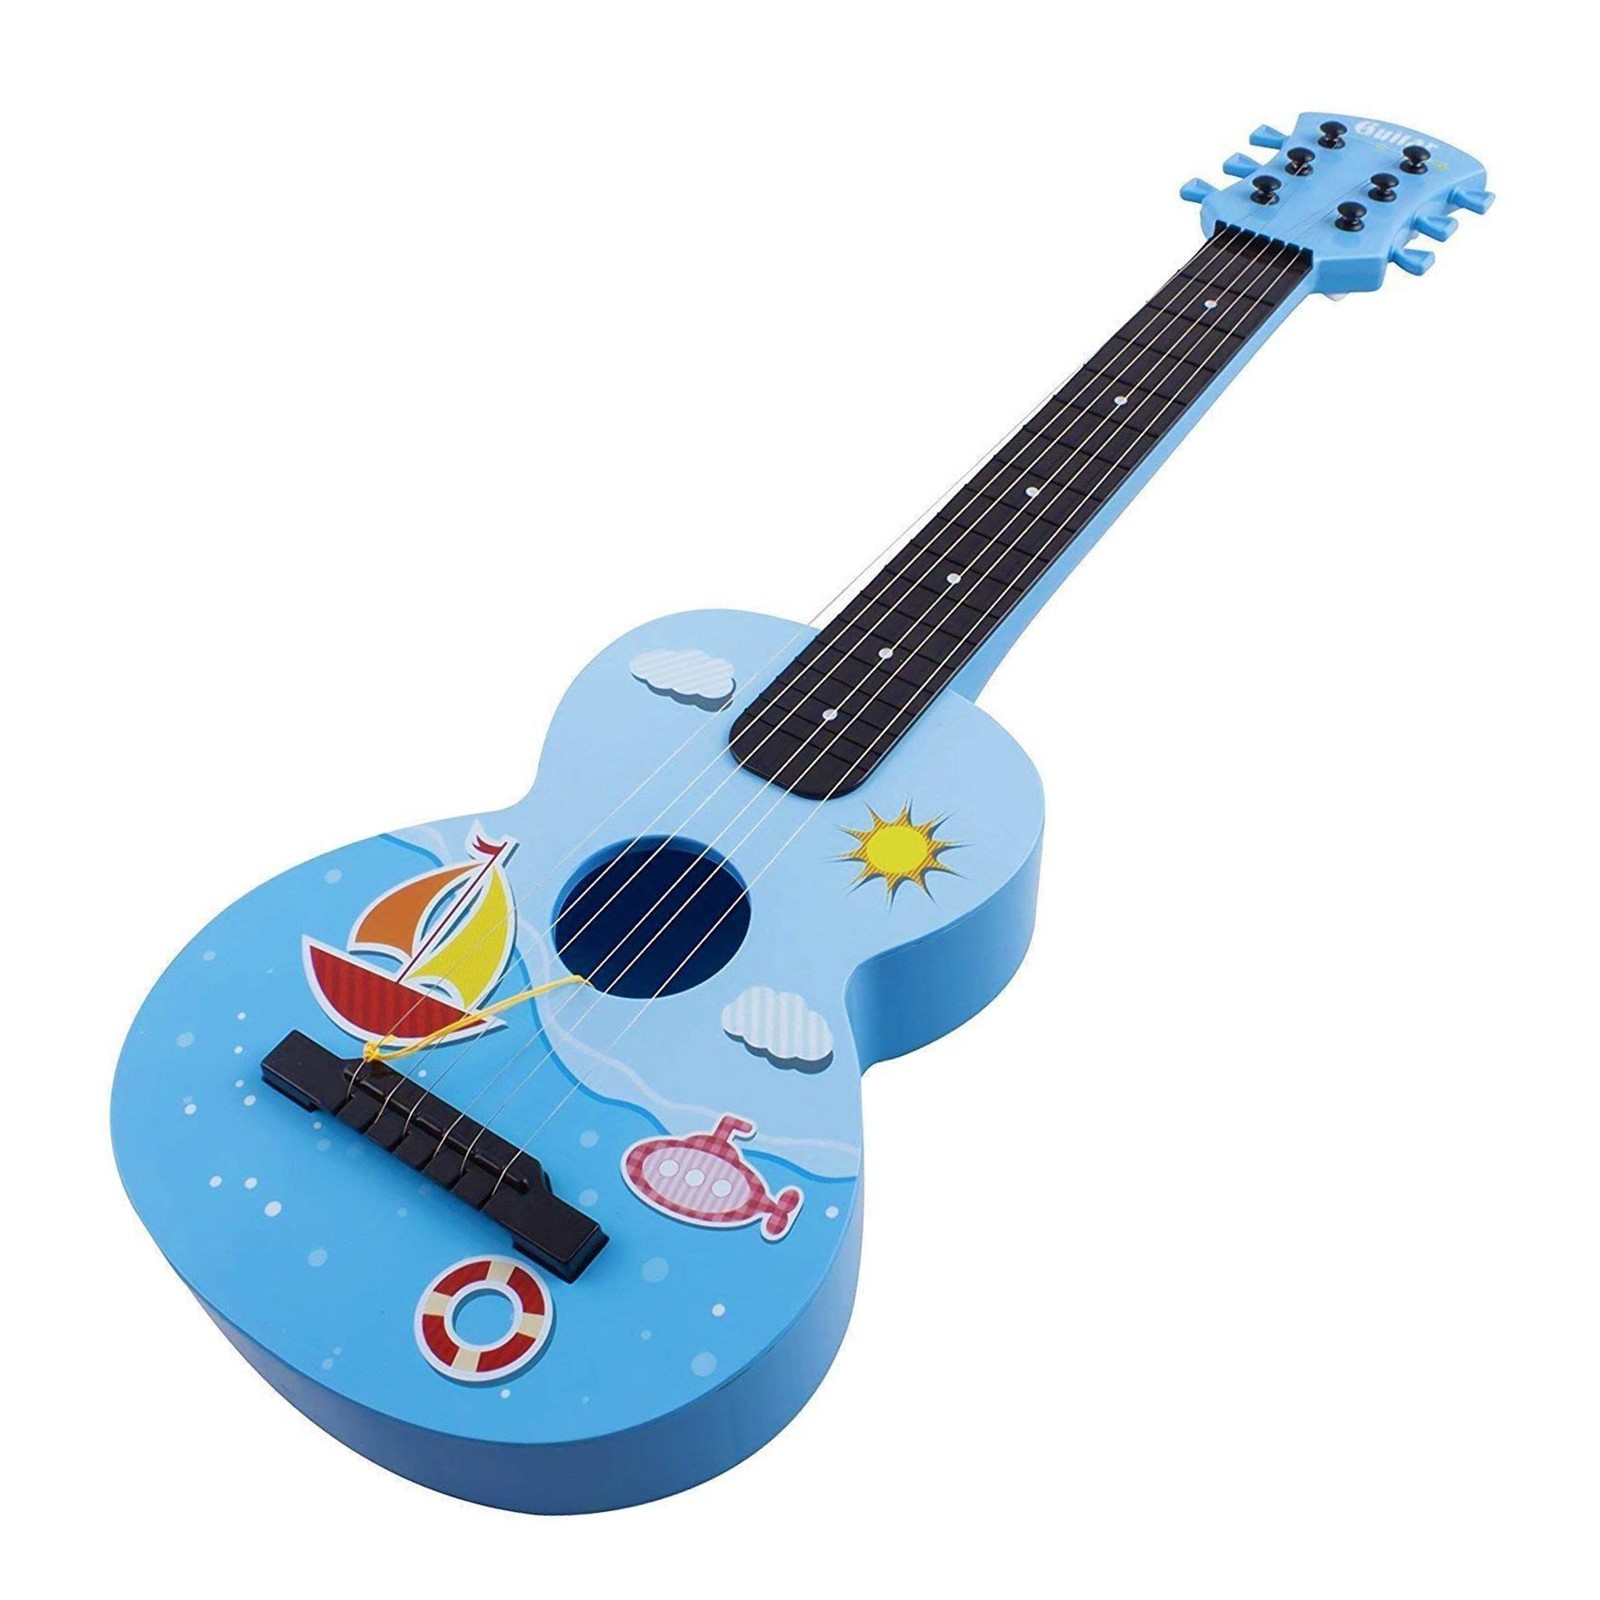 Toy Guitar Rock Star 6 String Acoustic Kids Ukulele With Guitar Pick Children's Musical Instrument Vibrant Sound And Colors Tunable Strings Educational And Perfect For Learning How To Play Blue